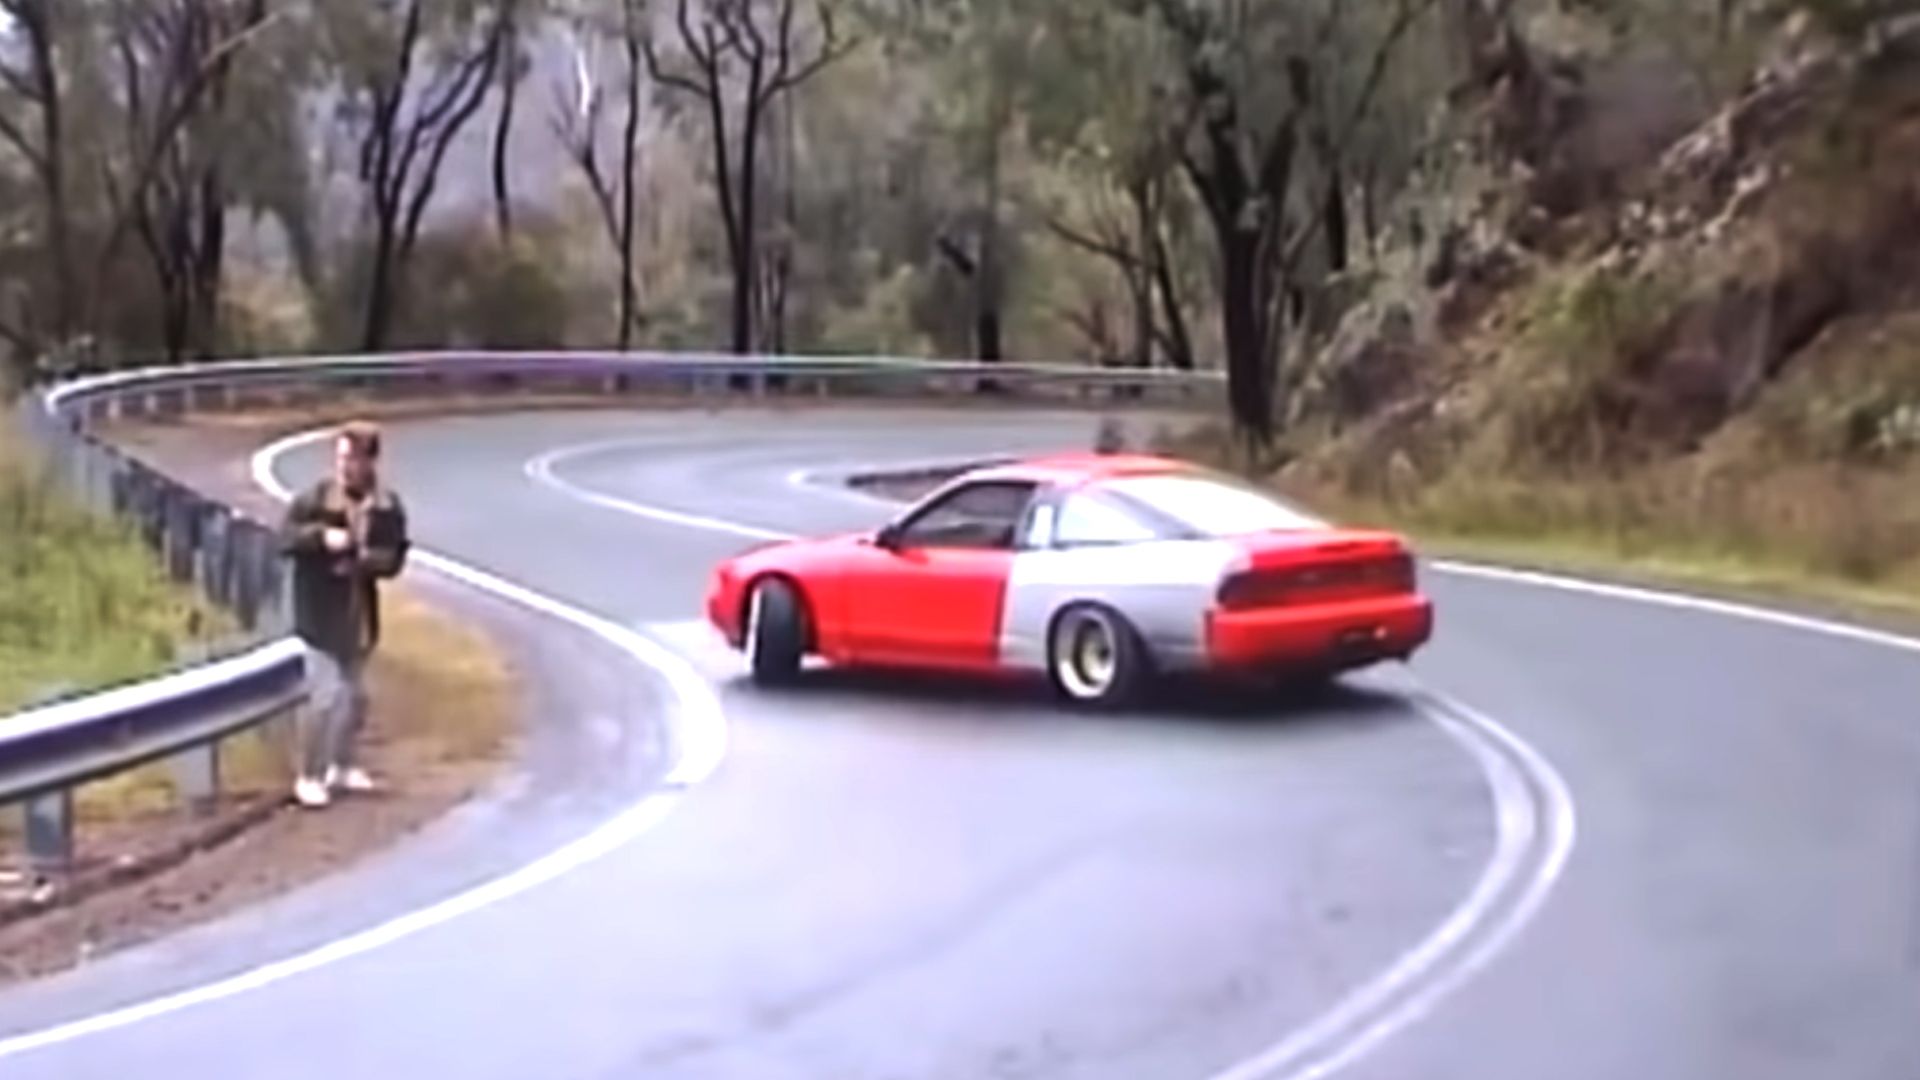 Streeto II: 20 minutes of illegal street drifting you never knew you needed